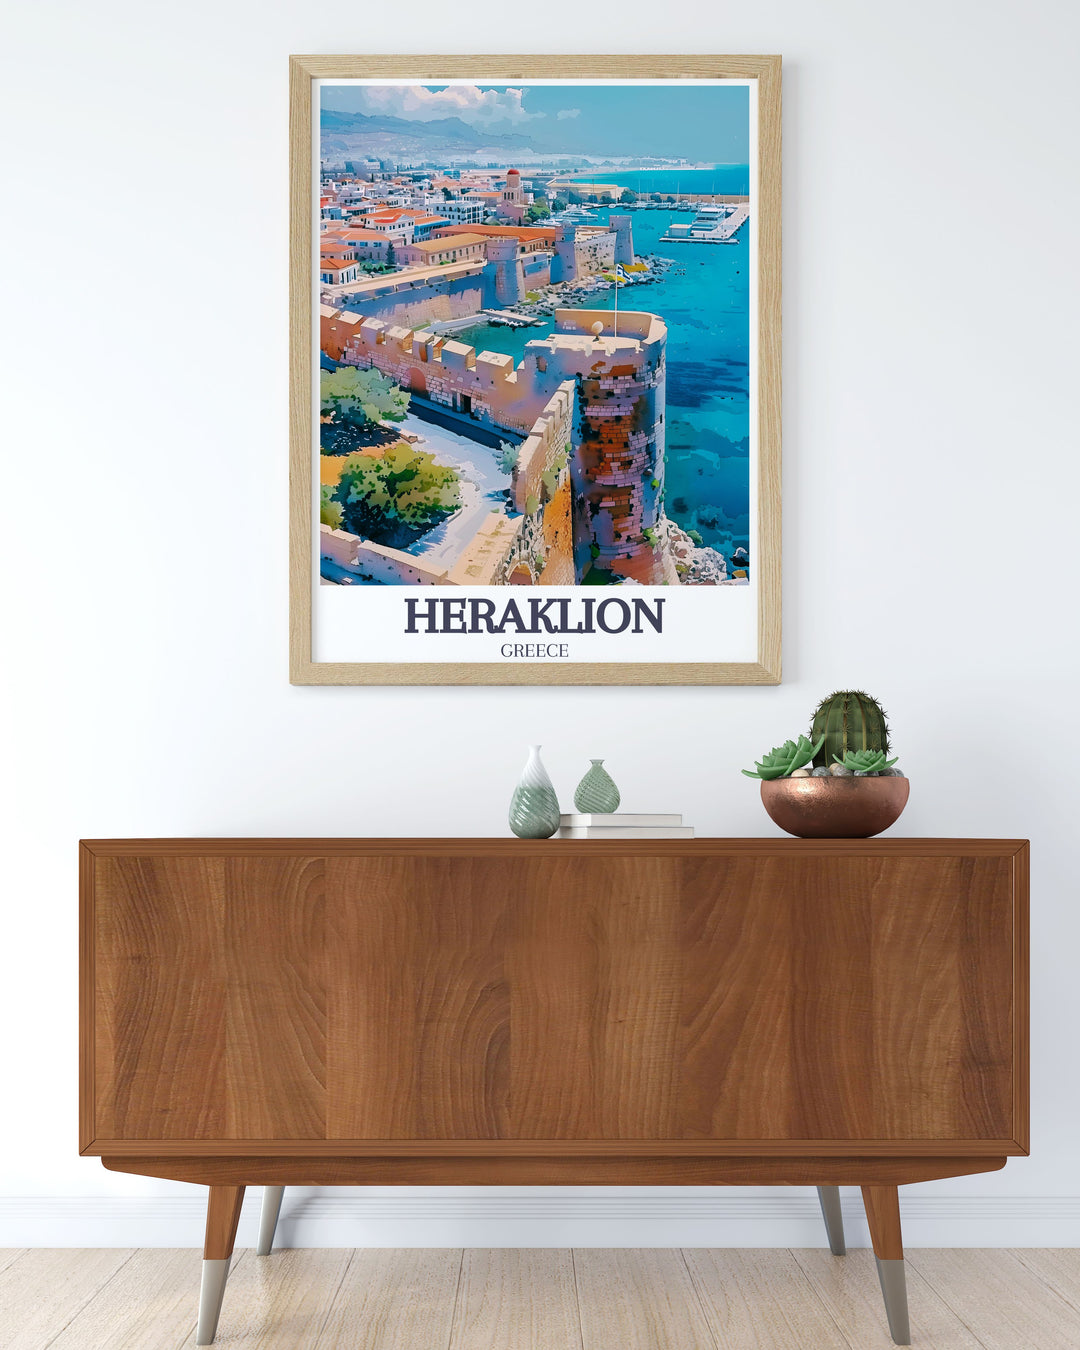 Travel poster of the Old Harbor in Heraklion, Crete, Greece, showcasing its historical significance and tranquil beauty. The detailed illustration captures the harbors lively atmosphere and architectural charm, making it ideal for any travel enthusiast.